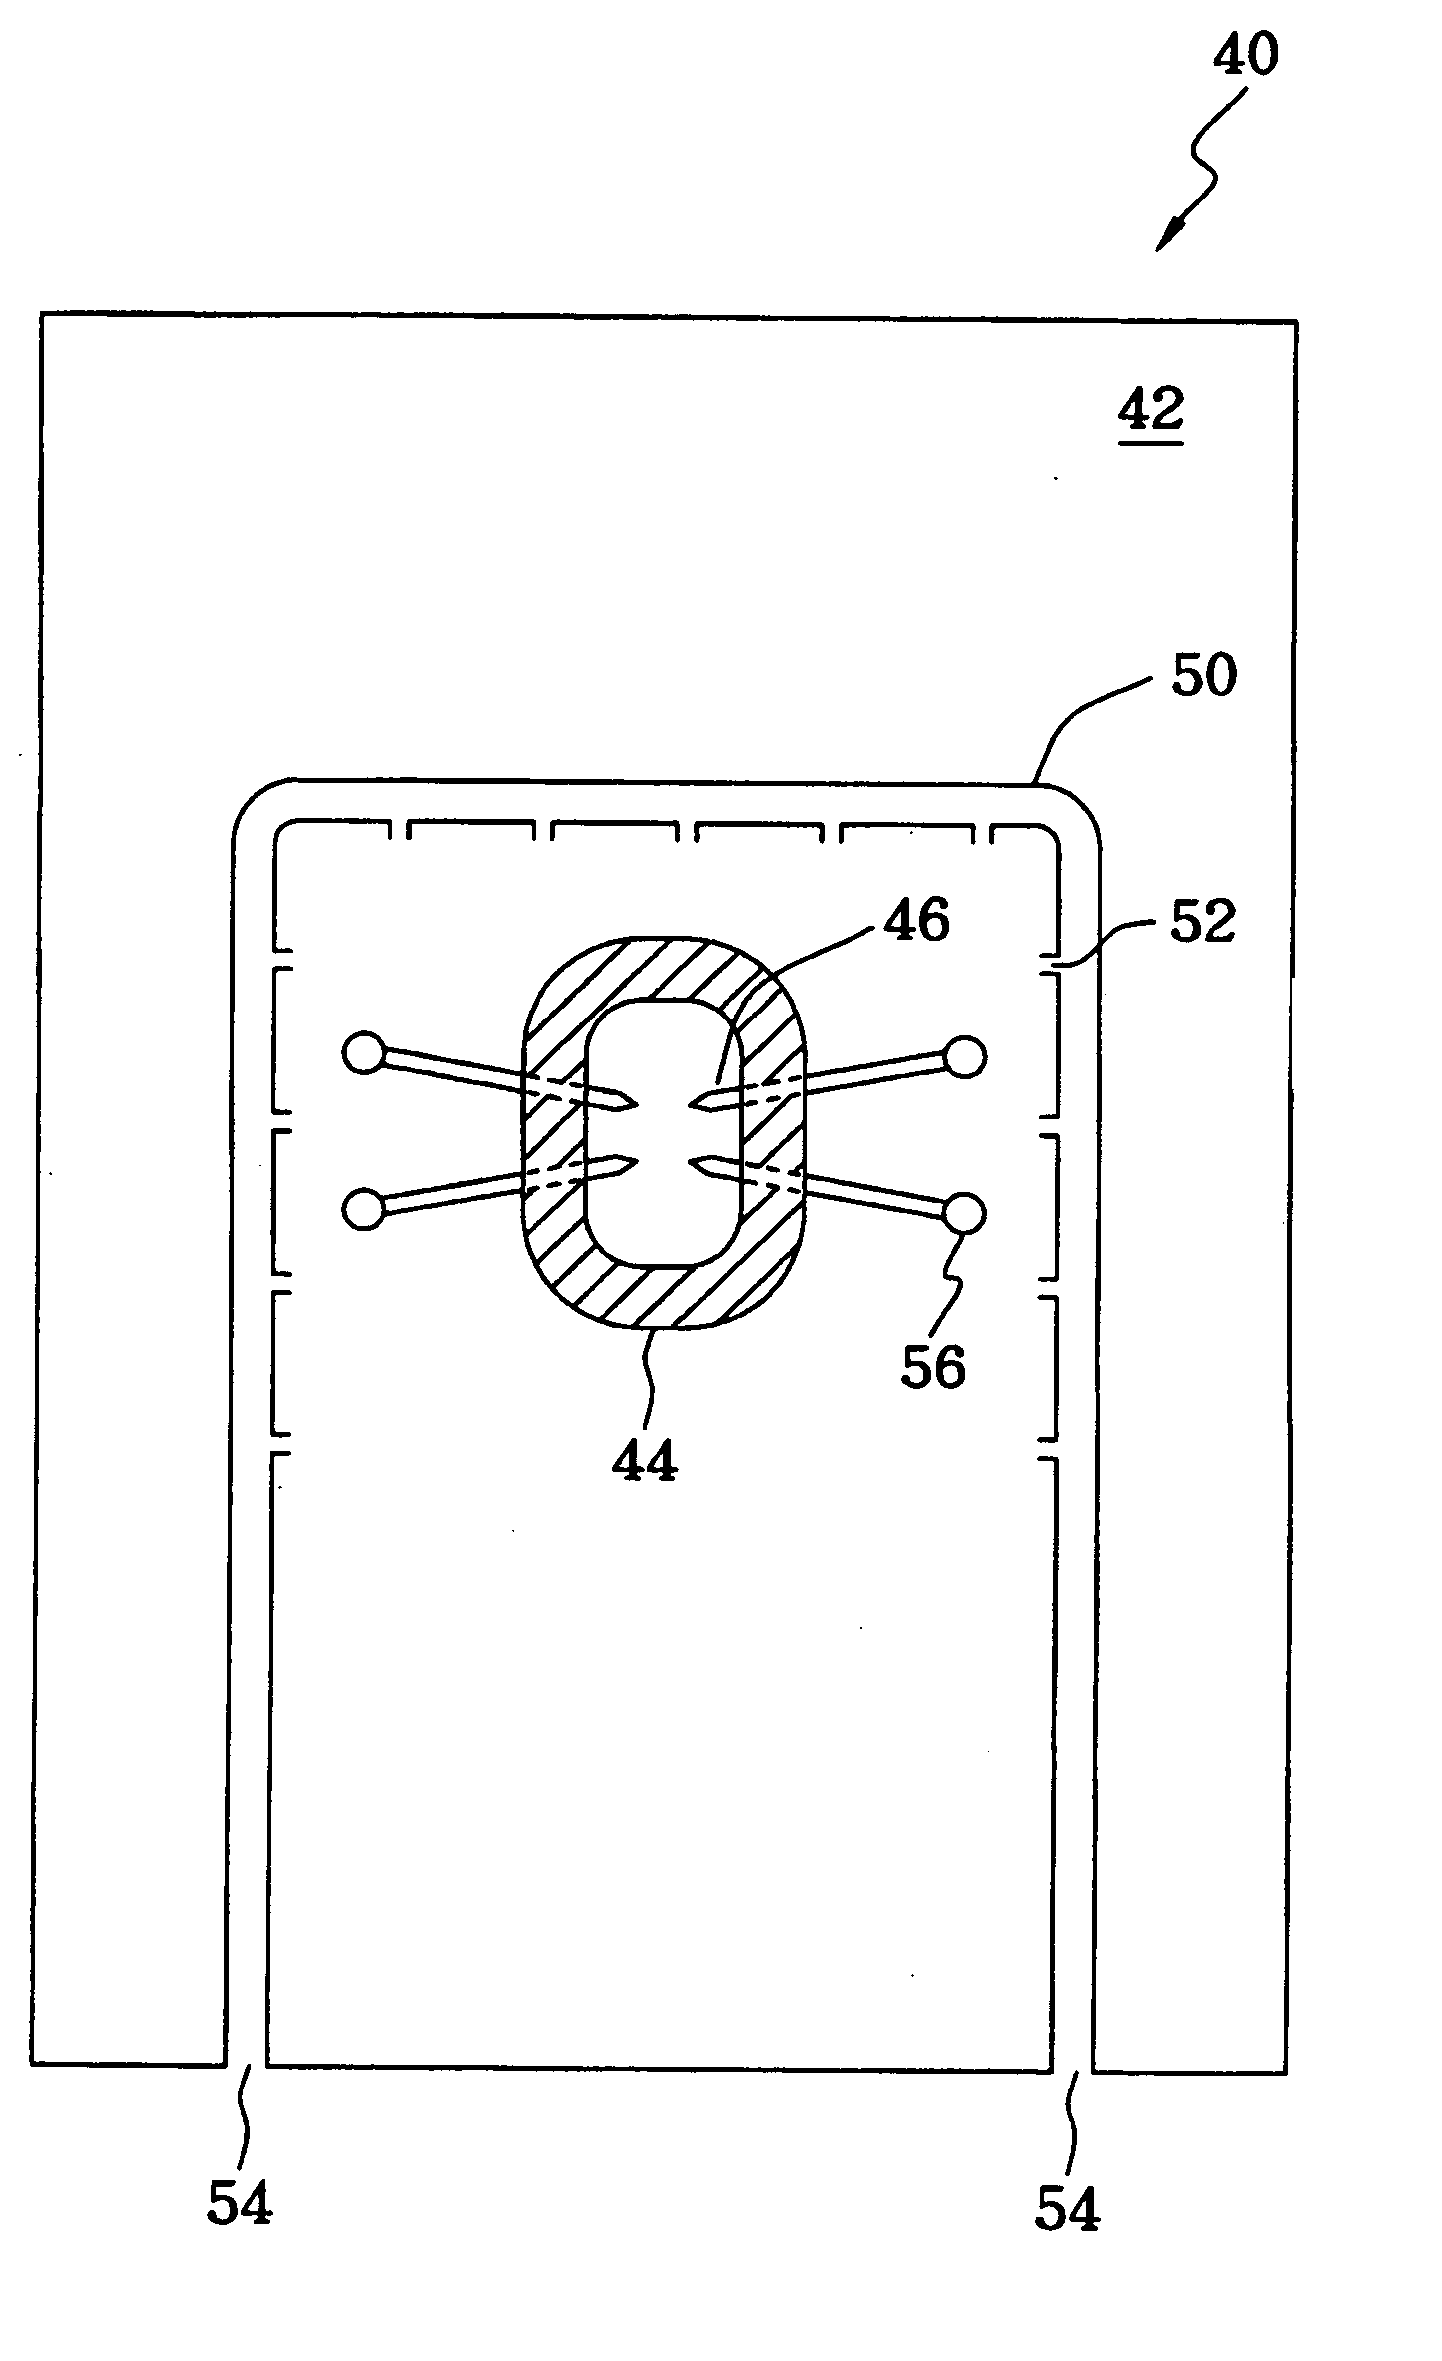 Probe card for testing a semiconductor